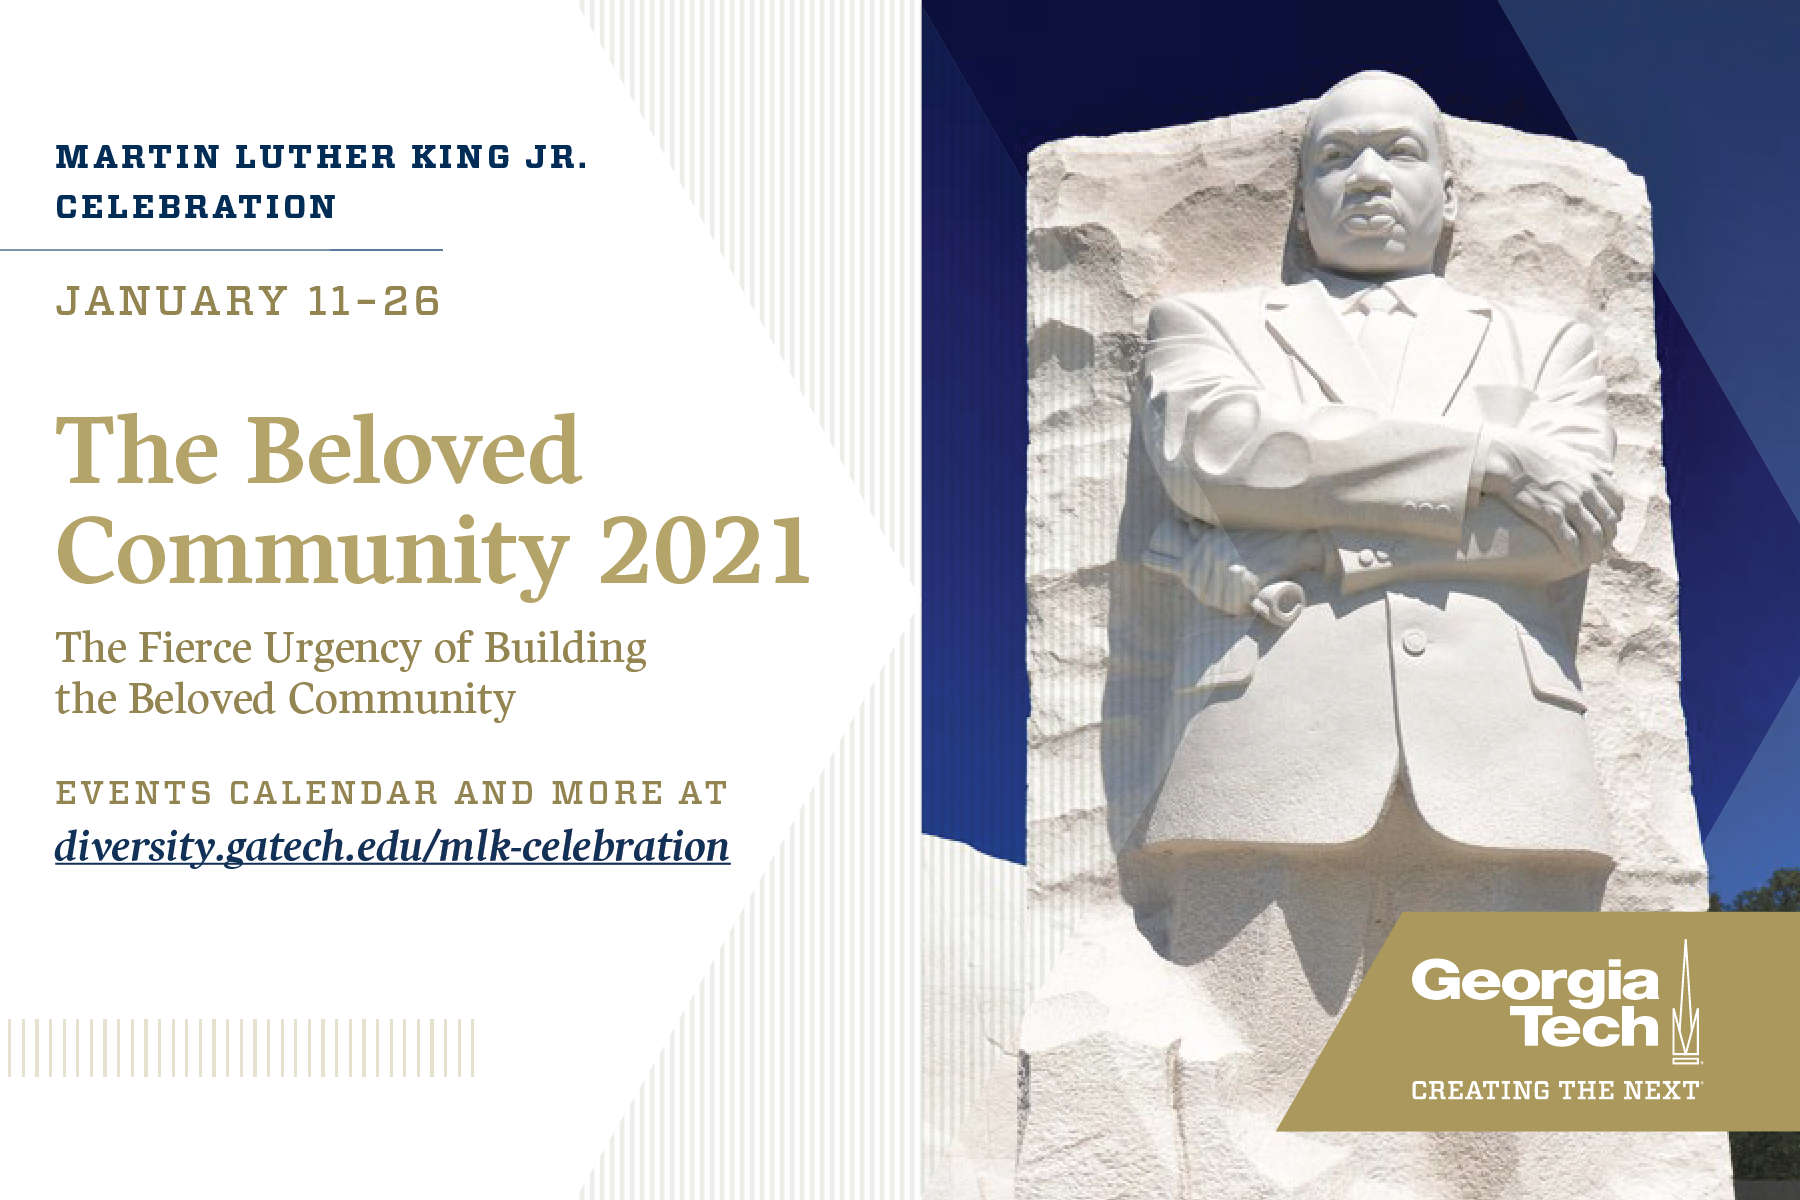 The 2021 Martin Luther King Jr. Celebration and Commemoration Event Series at Georgia Tech